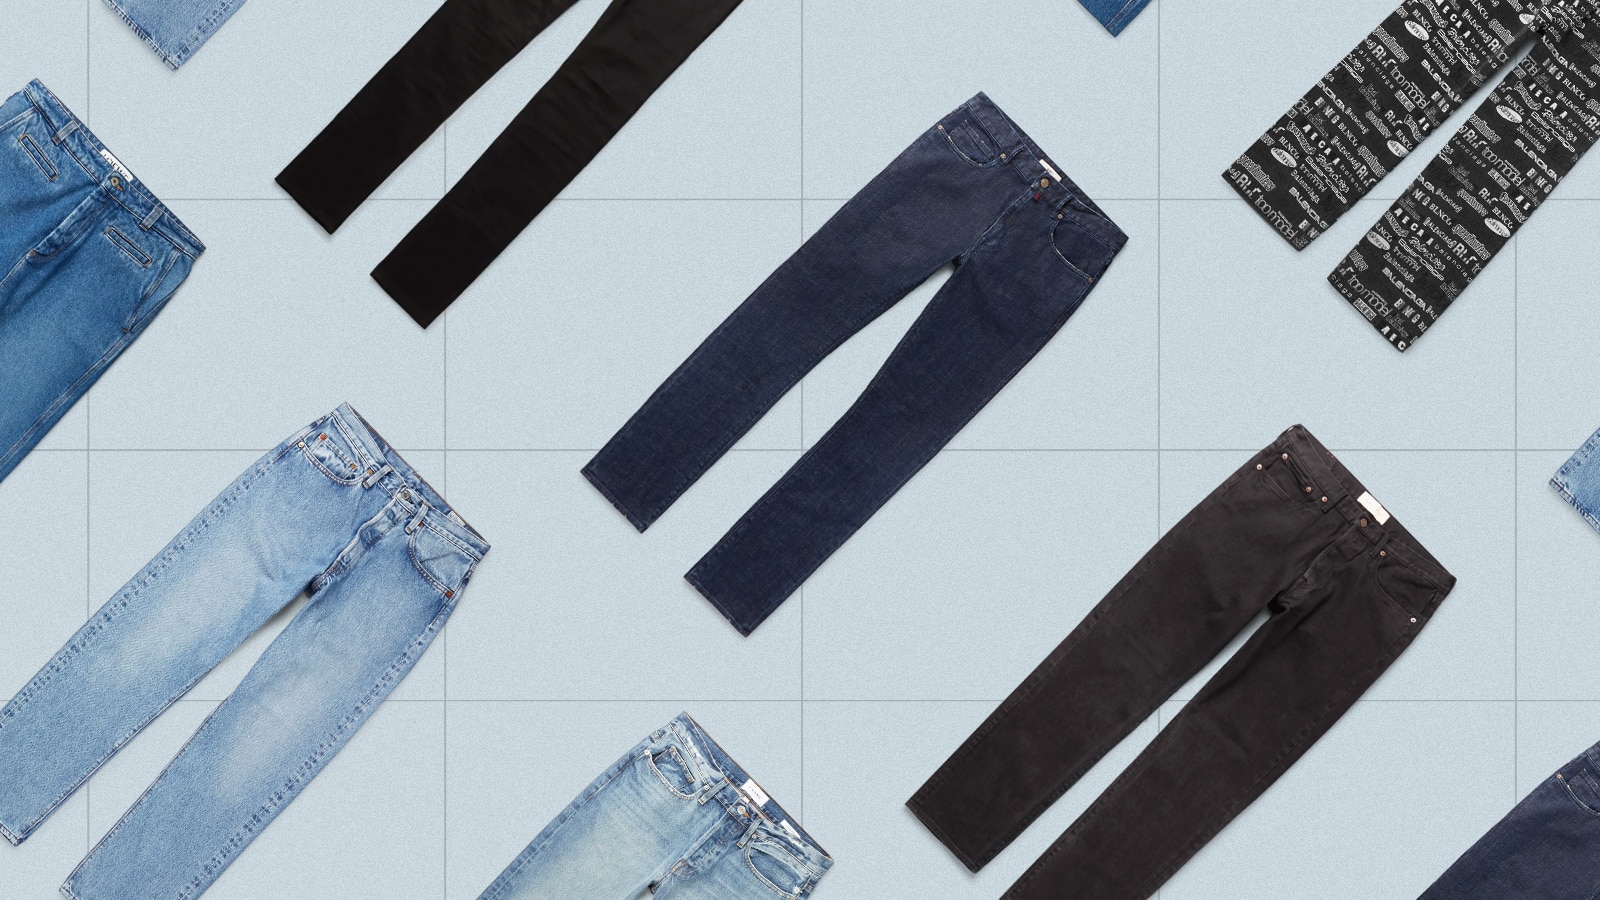 PORTER Everything Know Ever | To | Journal Wanted You Jeans About MR The